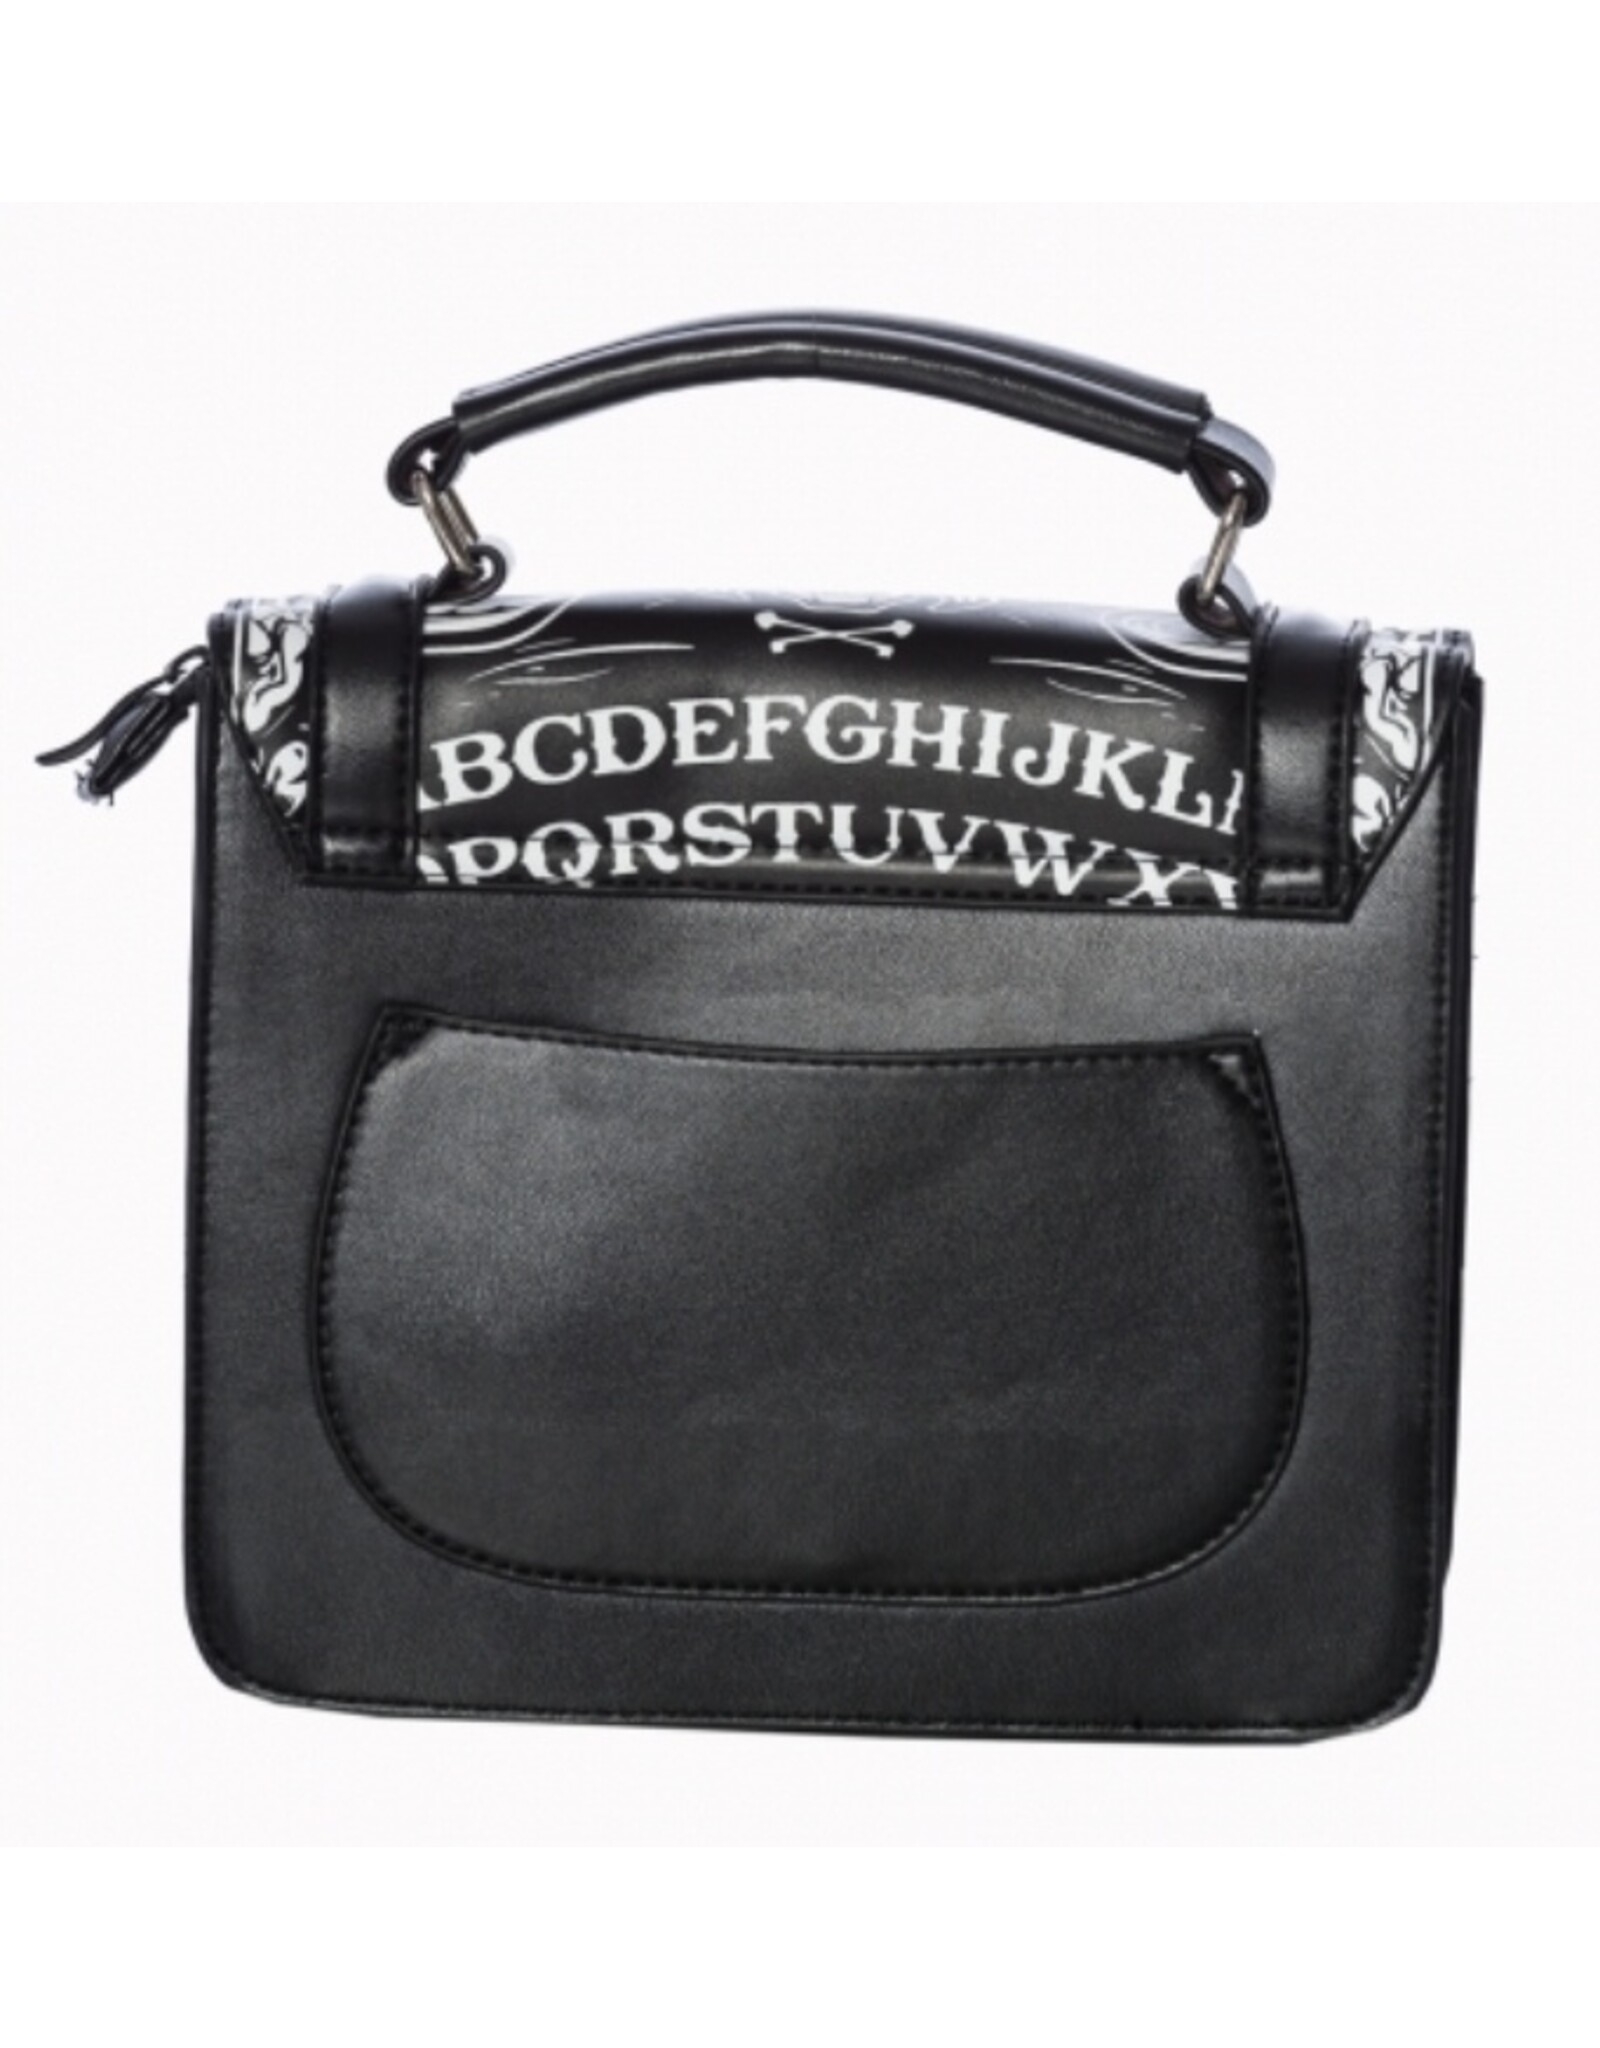 Banned Gothic bags Steampunk bags - Banned Cosmic Small Gothic Sachel bag - Copy